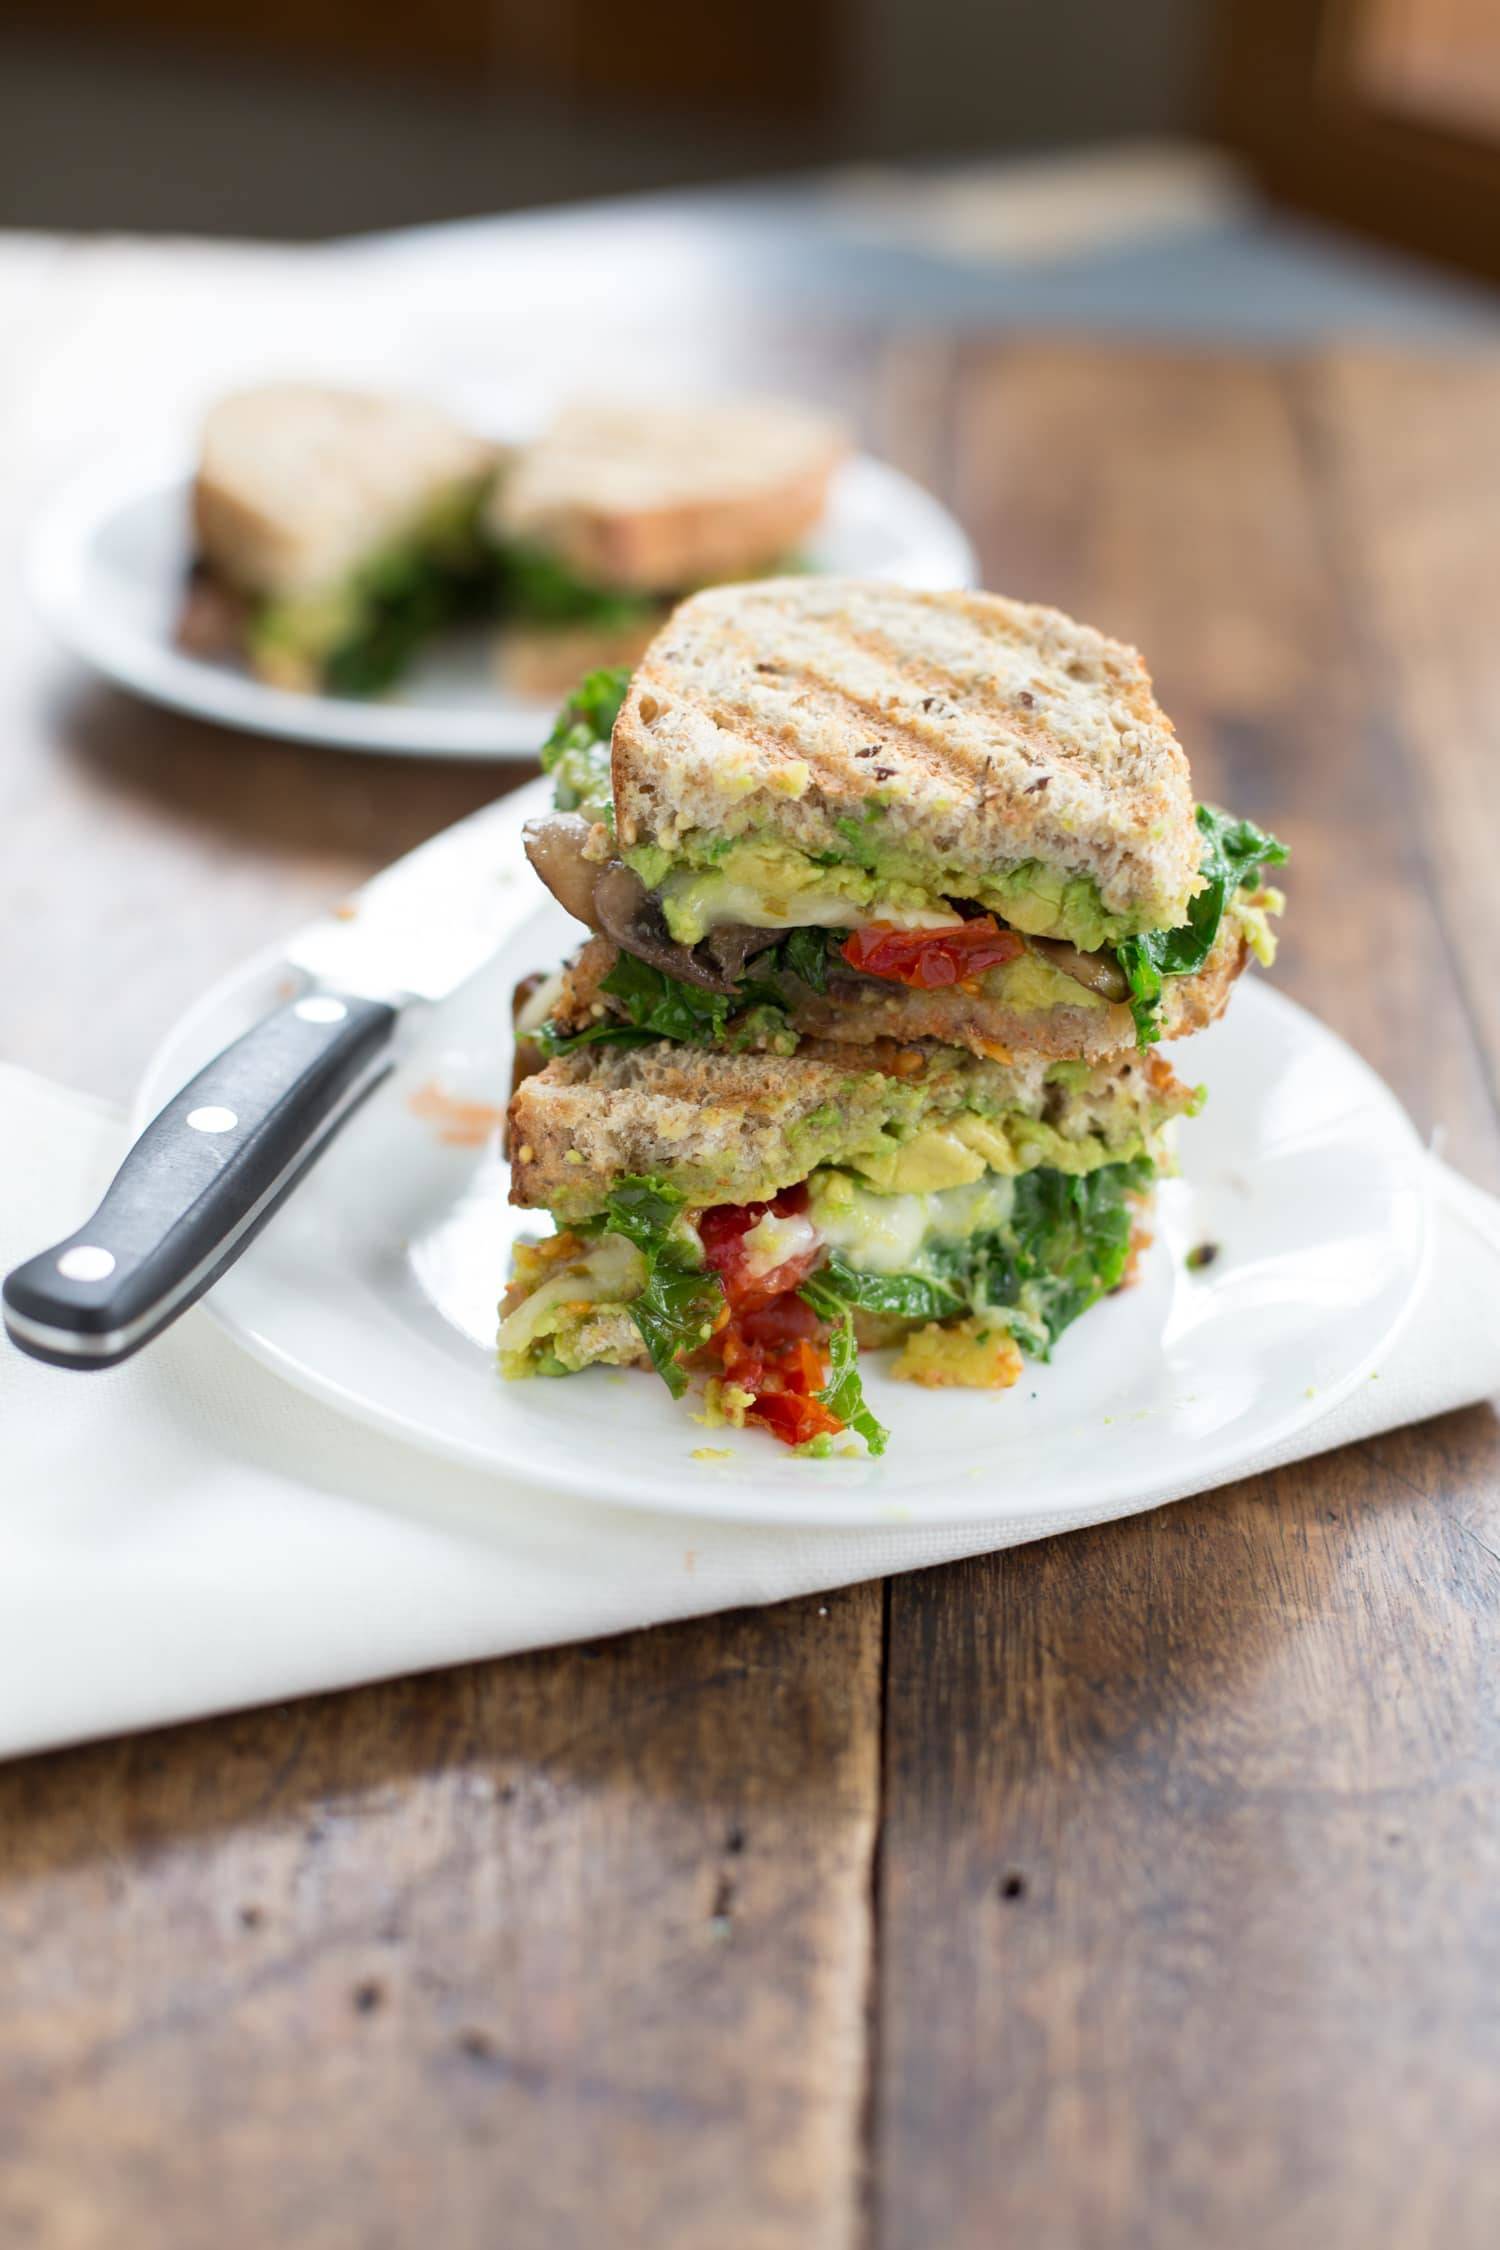 A panini with avocado, roasted red bell peppers, and greens.